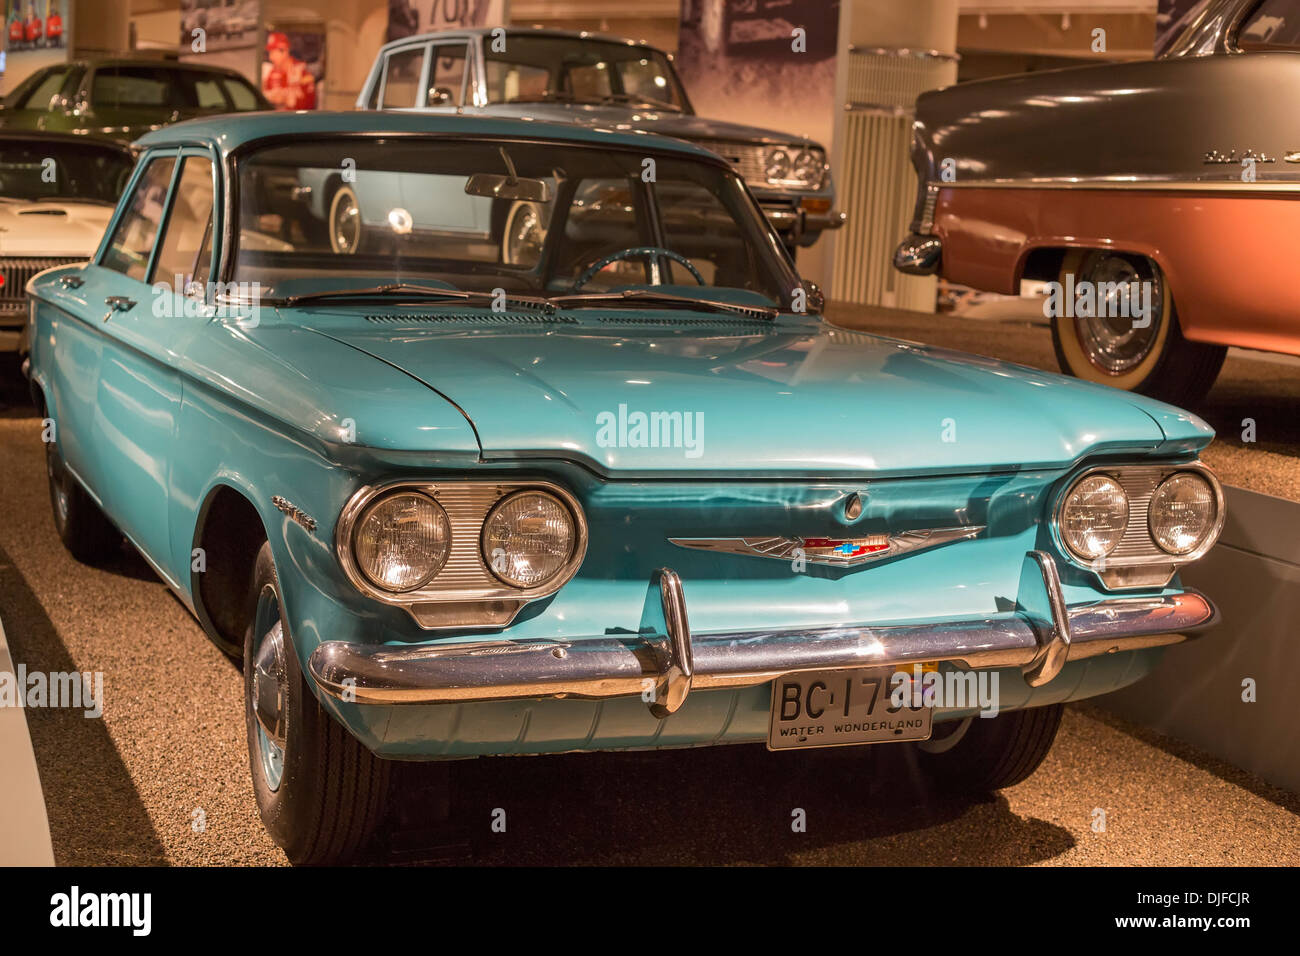 Dearborn, Michigan - The 1960 Chevrolet Corvair on display at the Henry Ford Museum. Stock Photo